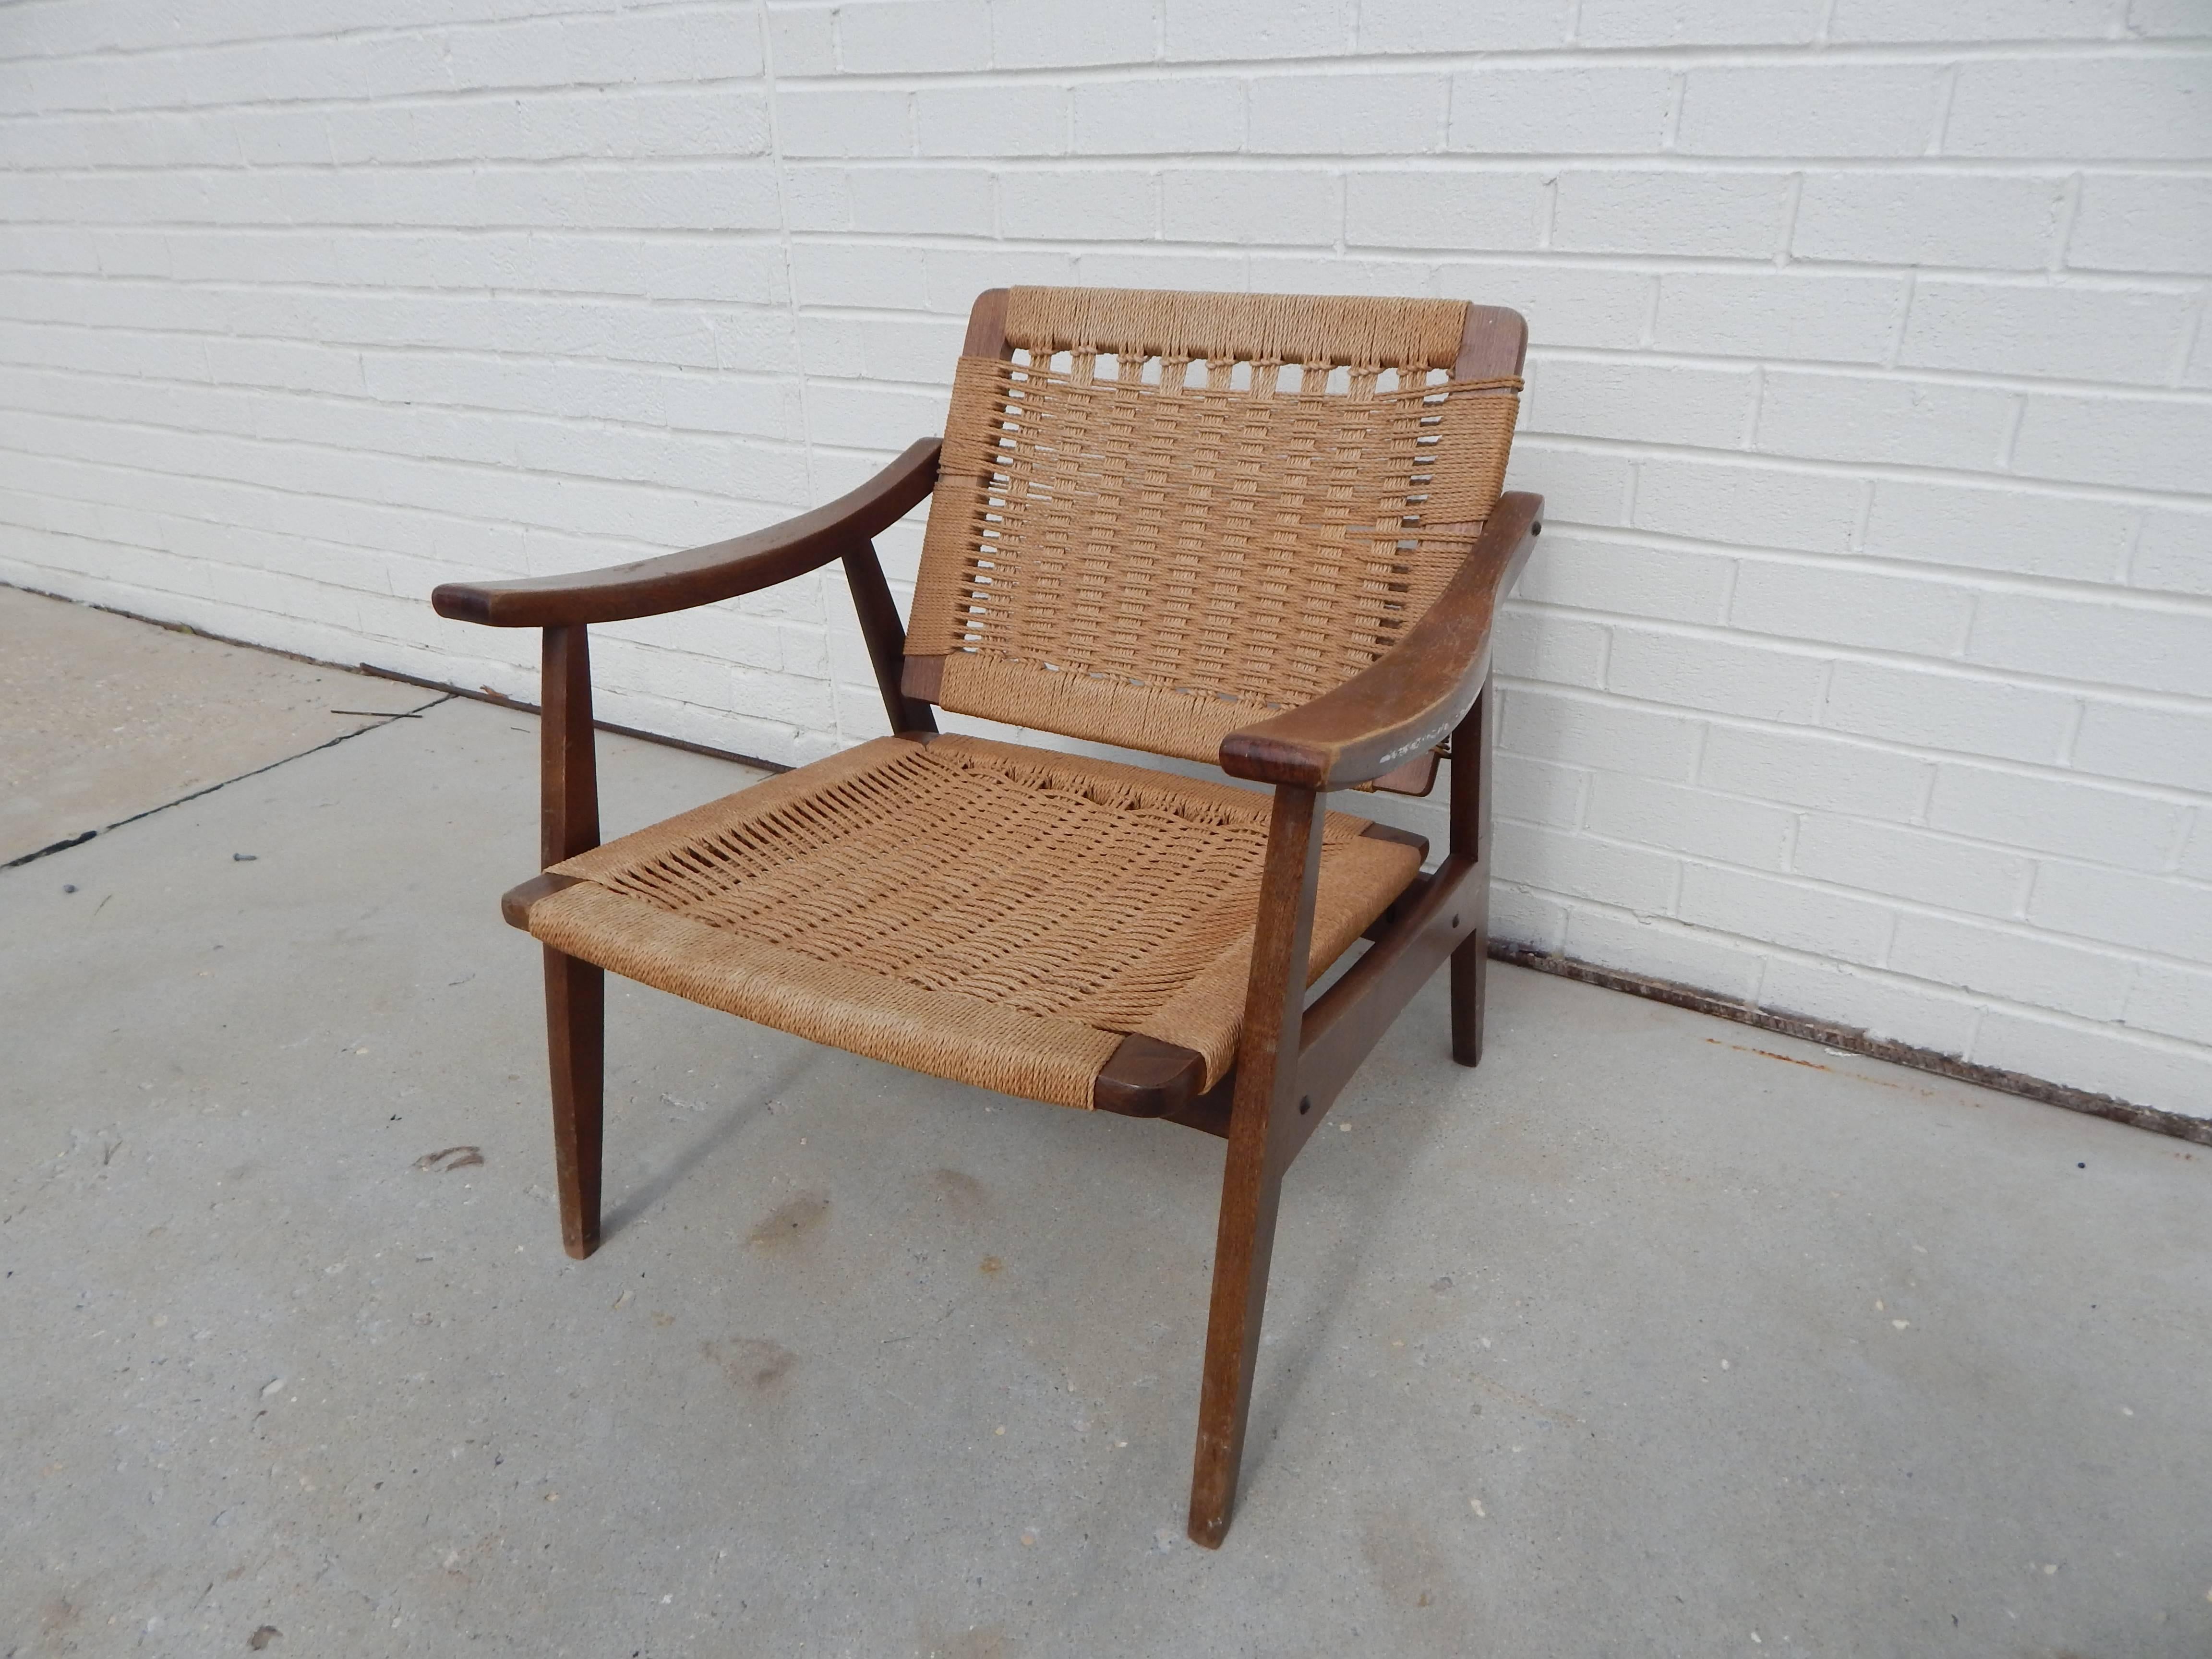 Mid-Century Hans Wegner style woven chair. Wood frame. Adjustable back. Rope weaving is in excellent condition wood frame shows some wear consistent with age and use.